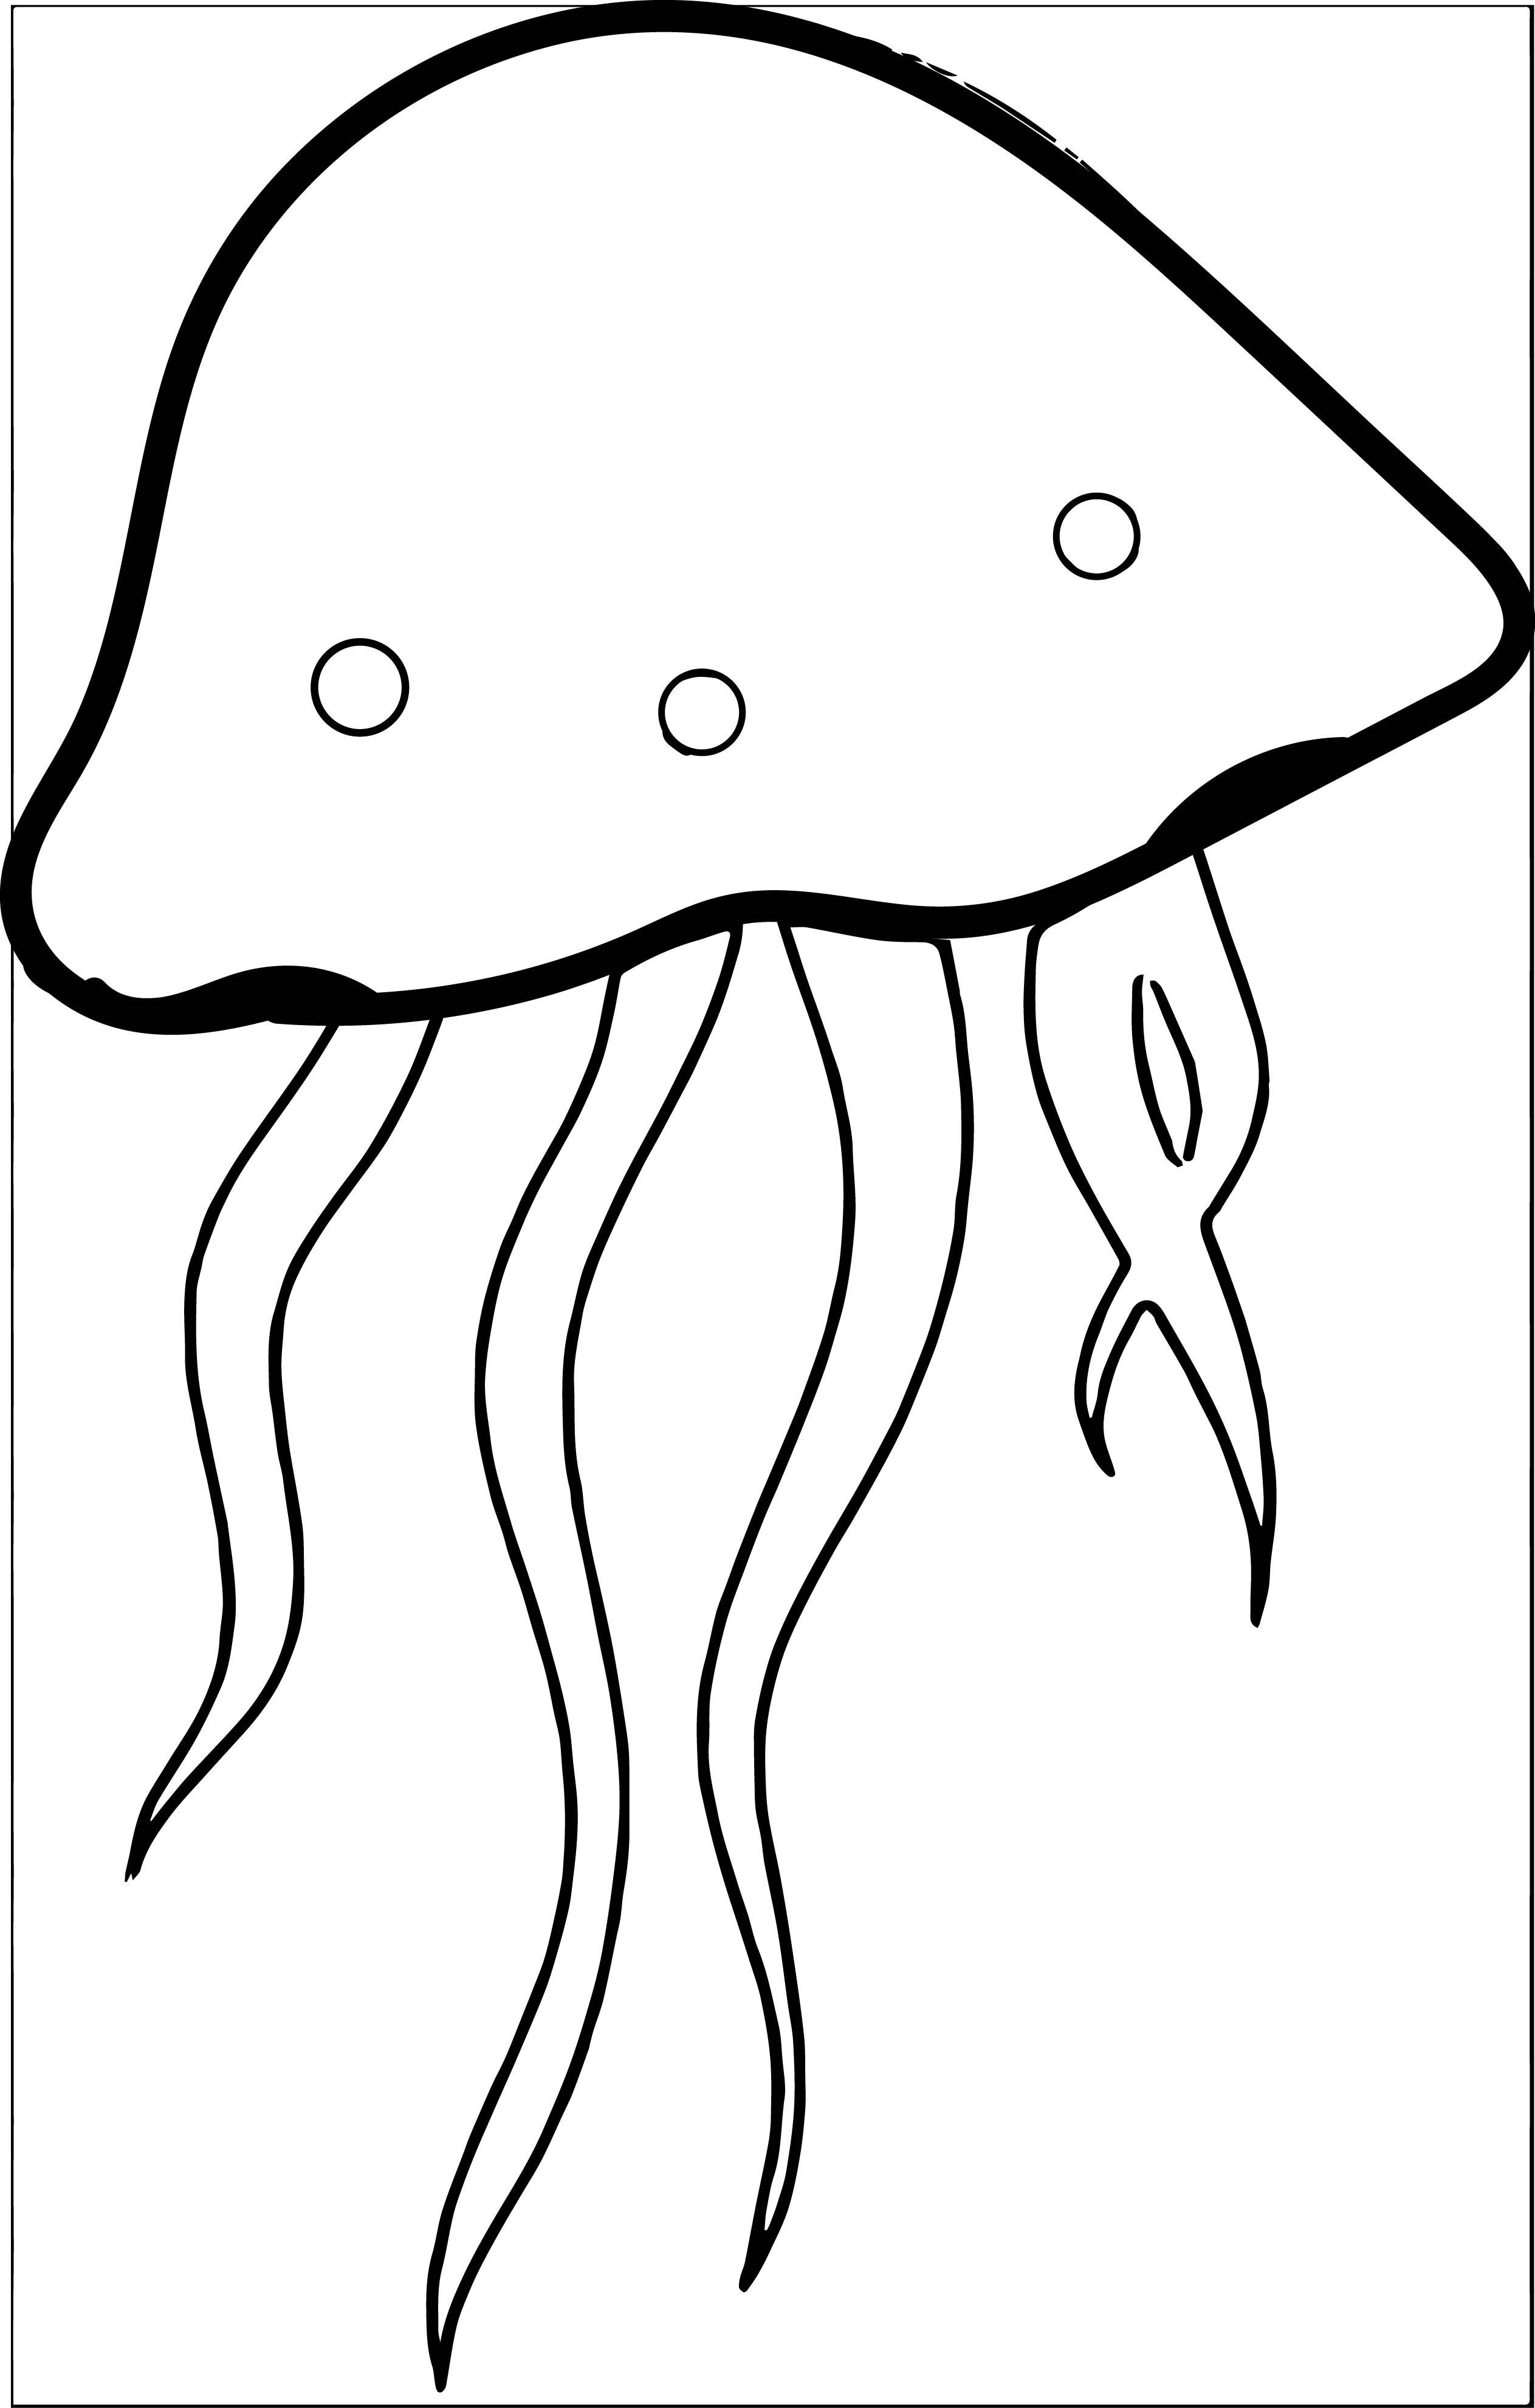 Jellyfish clipart clip art. Image of a 